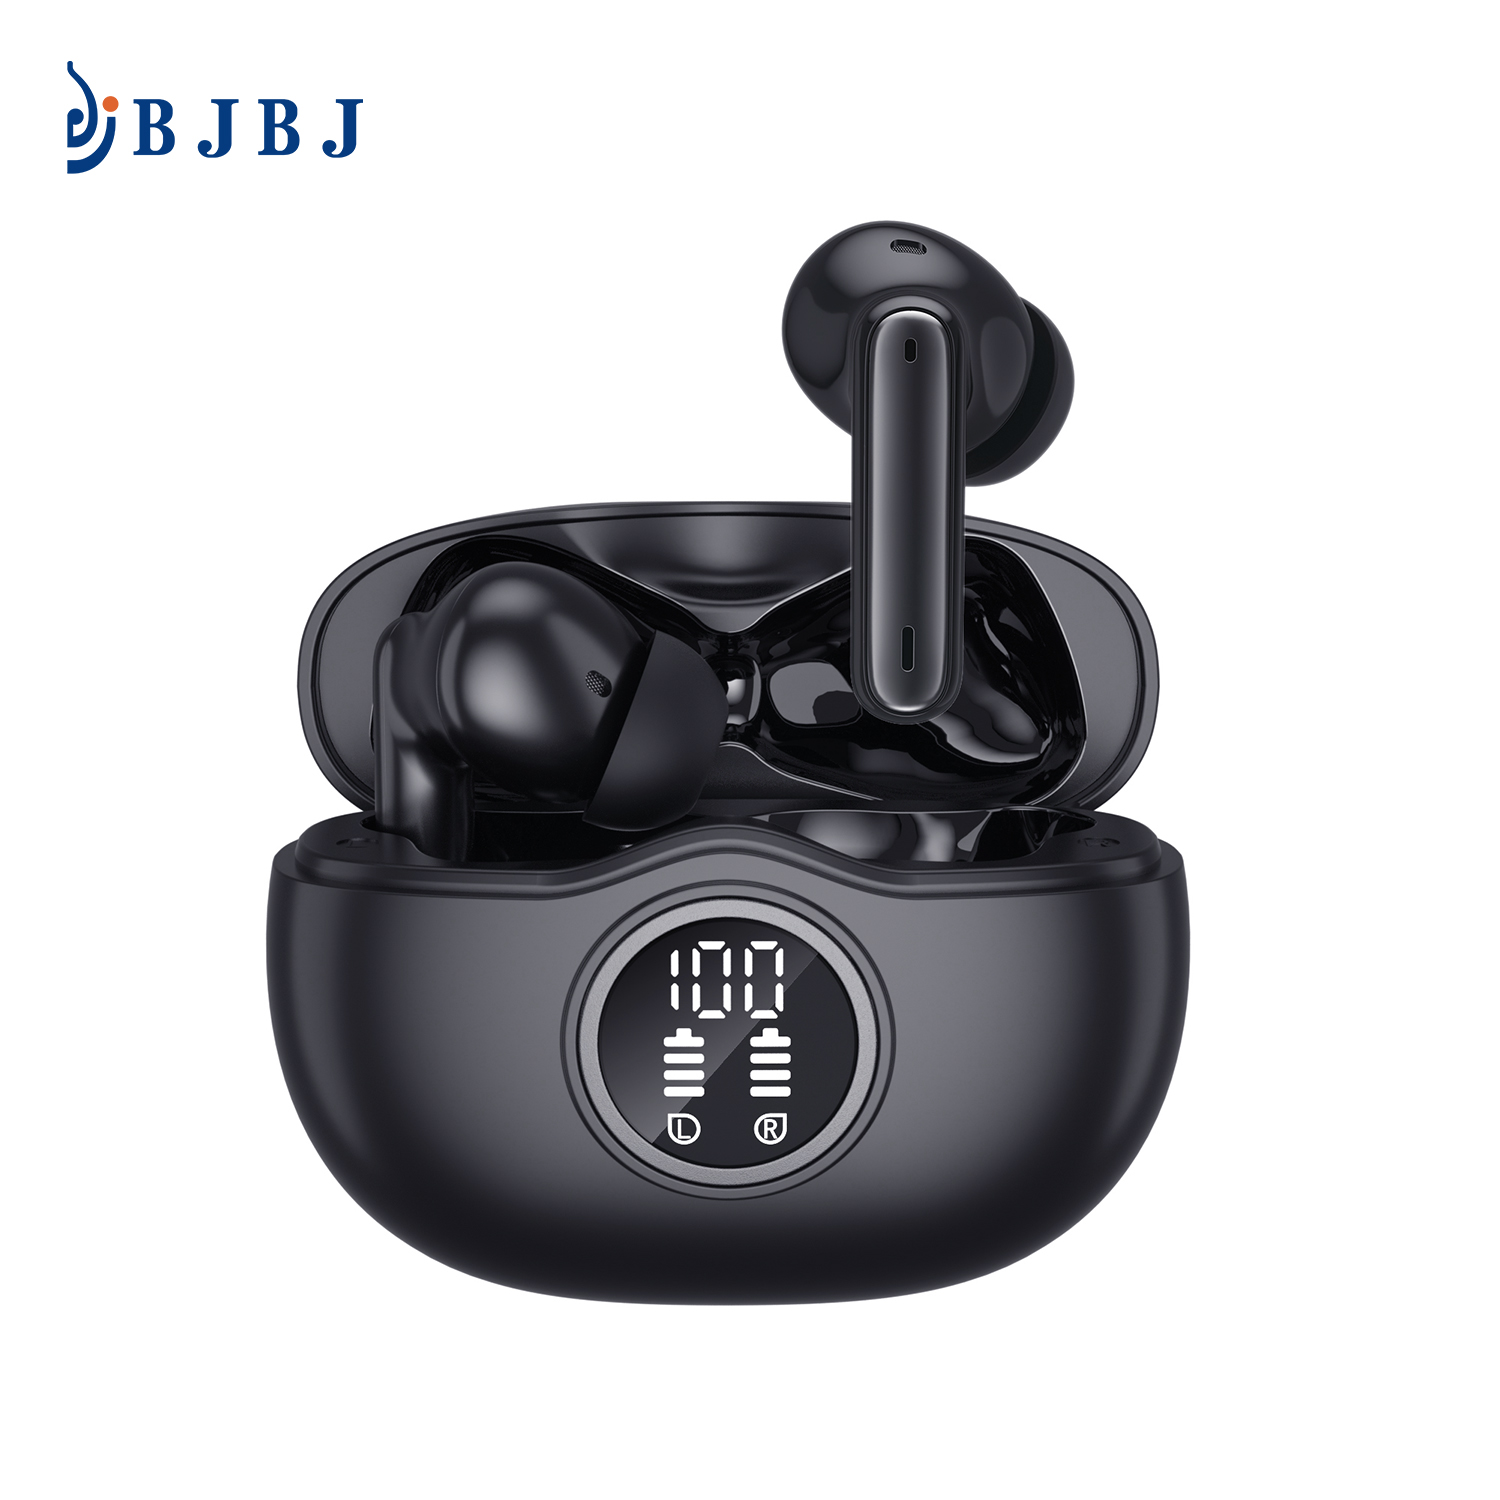 A10 Pro TWS bluetooth earbuds with Digital Display